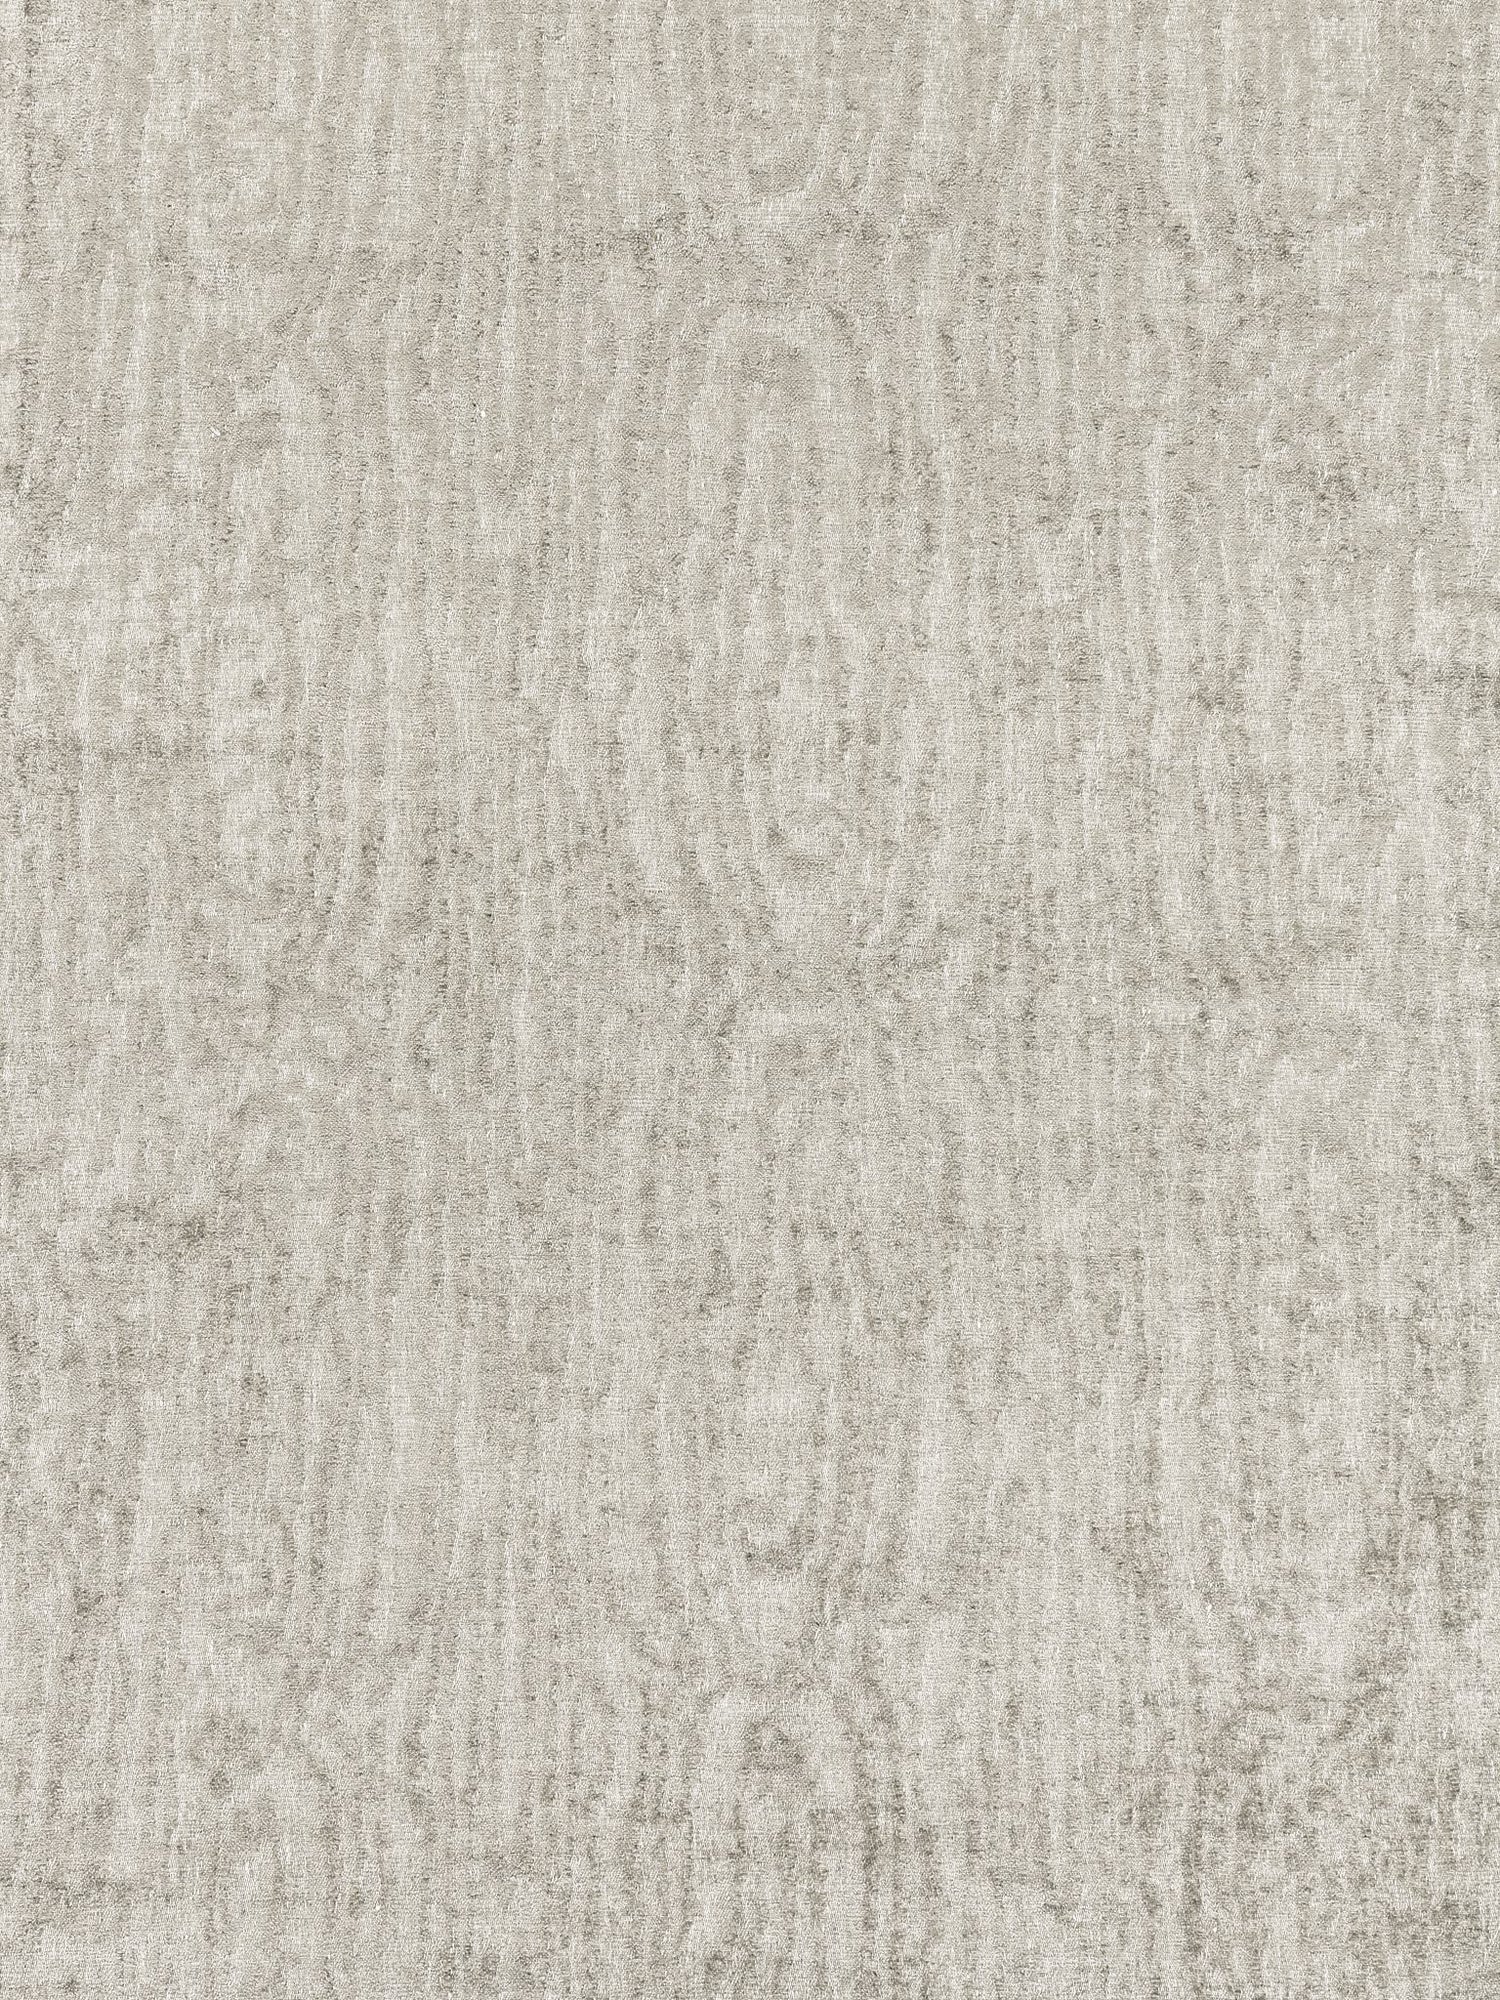 Whitby fabric in birch color - pattern number N3 00015102 - by Scalamandre in the Old World Weavers collection